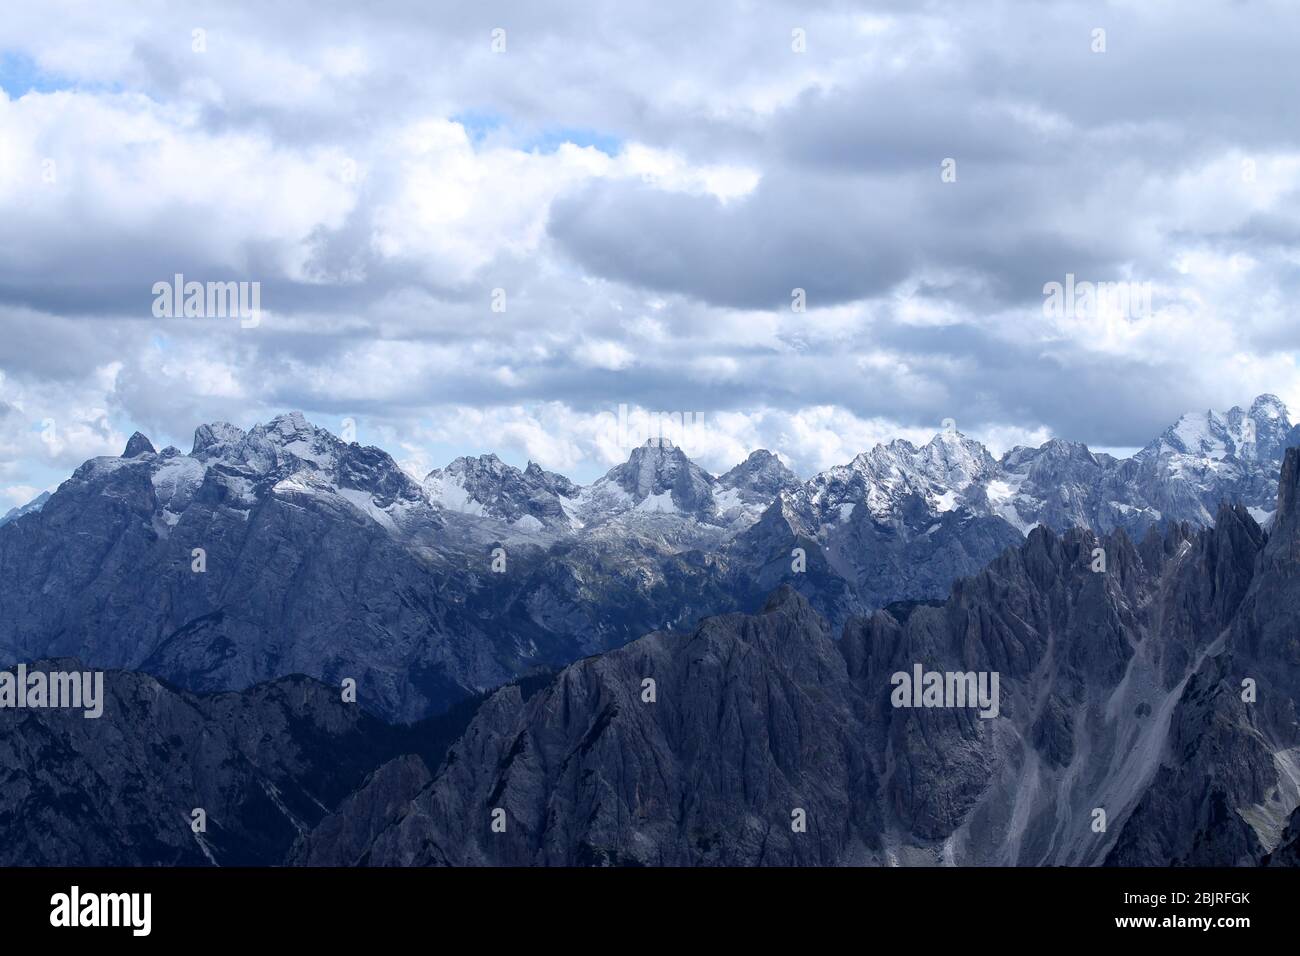 View over the mountains on a cloudy day in South-Tirol, Italy. Stock Photo